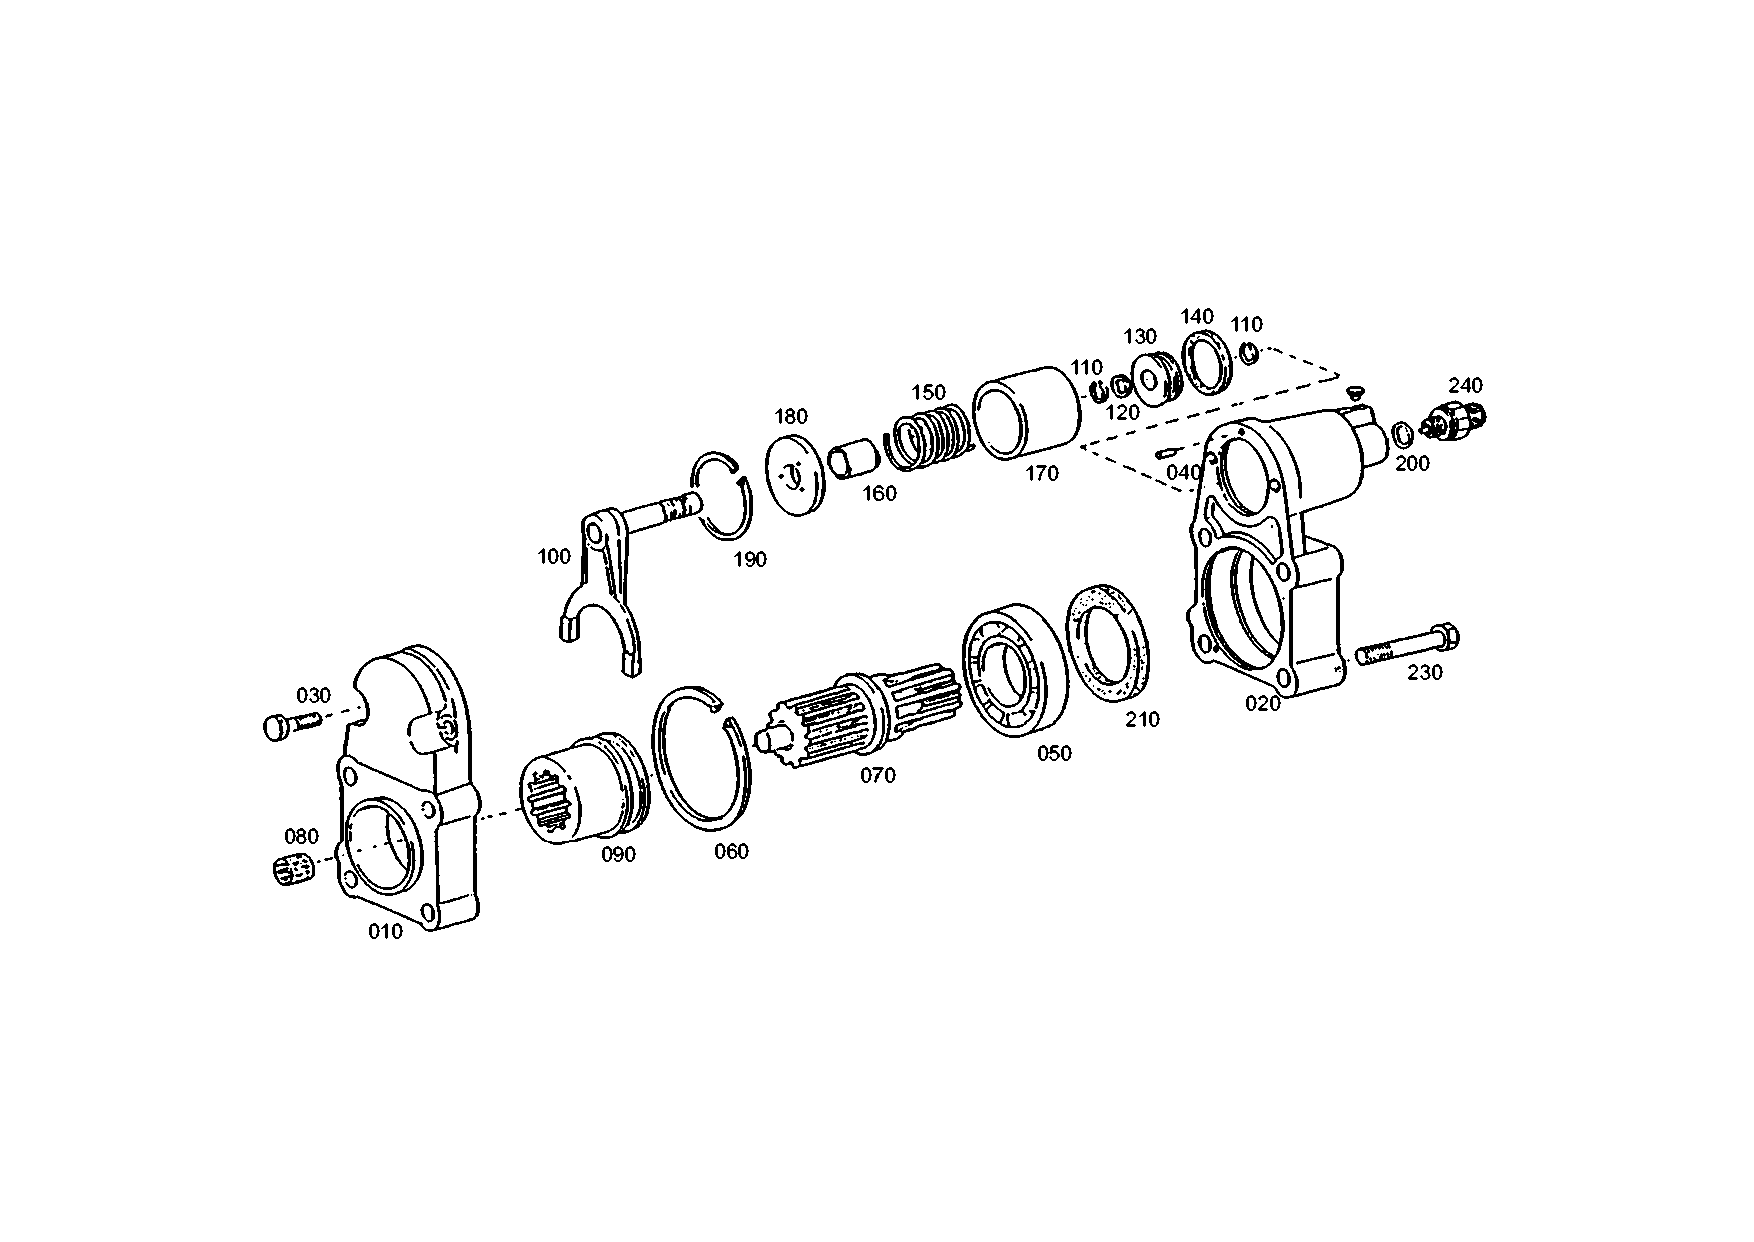 drawing for RABA 199014250123 - WASHER (figure 4)